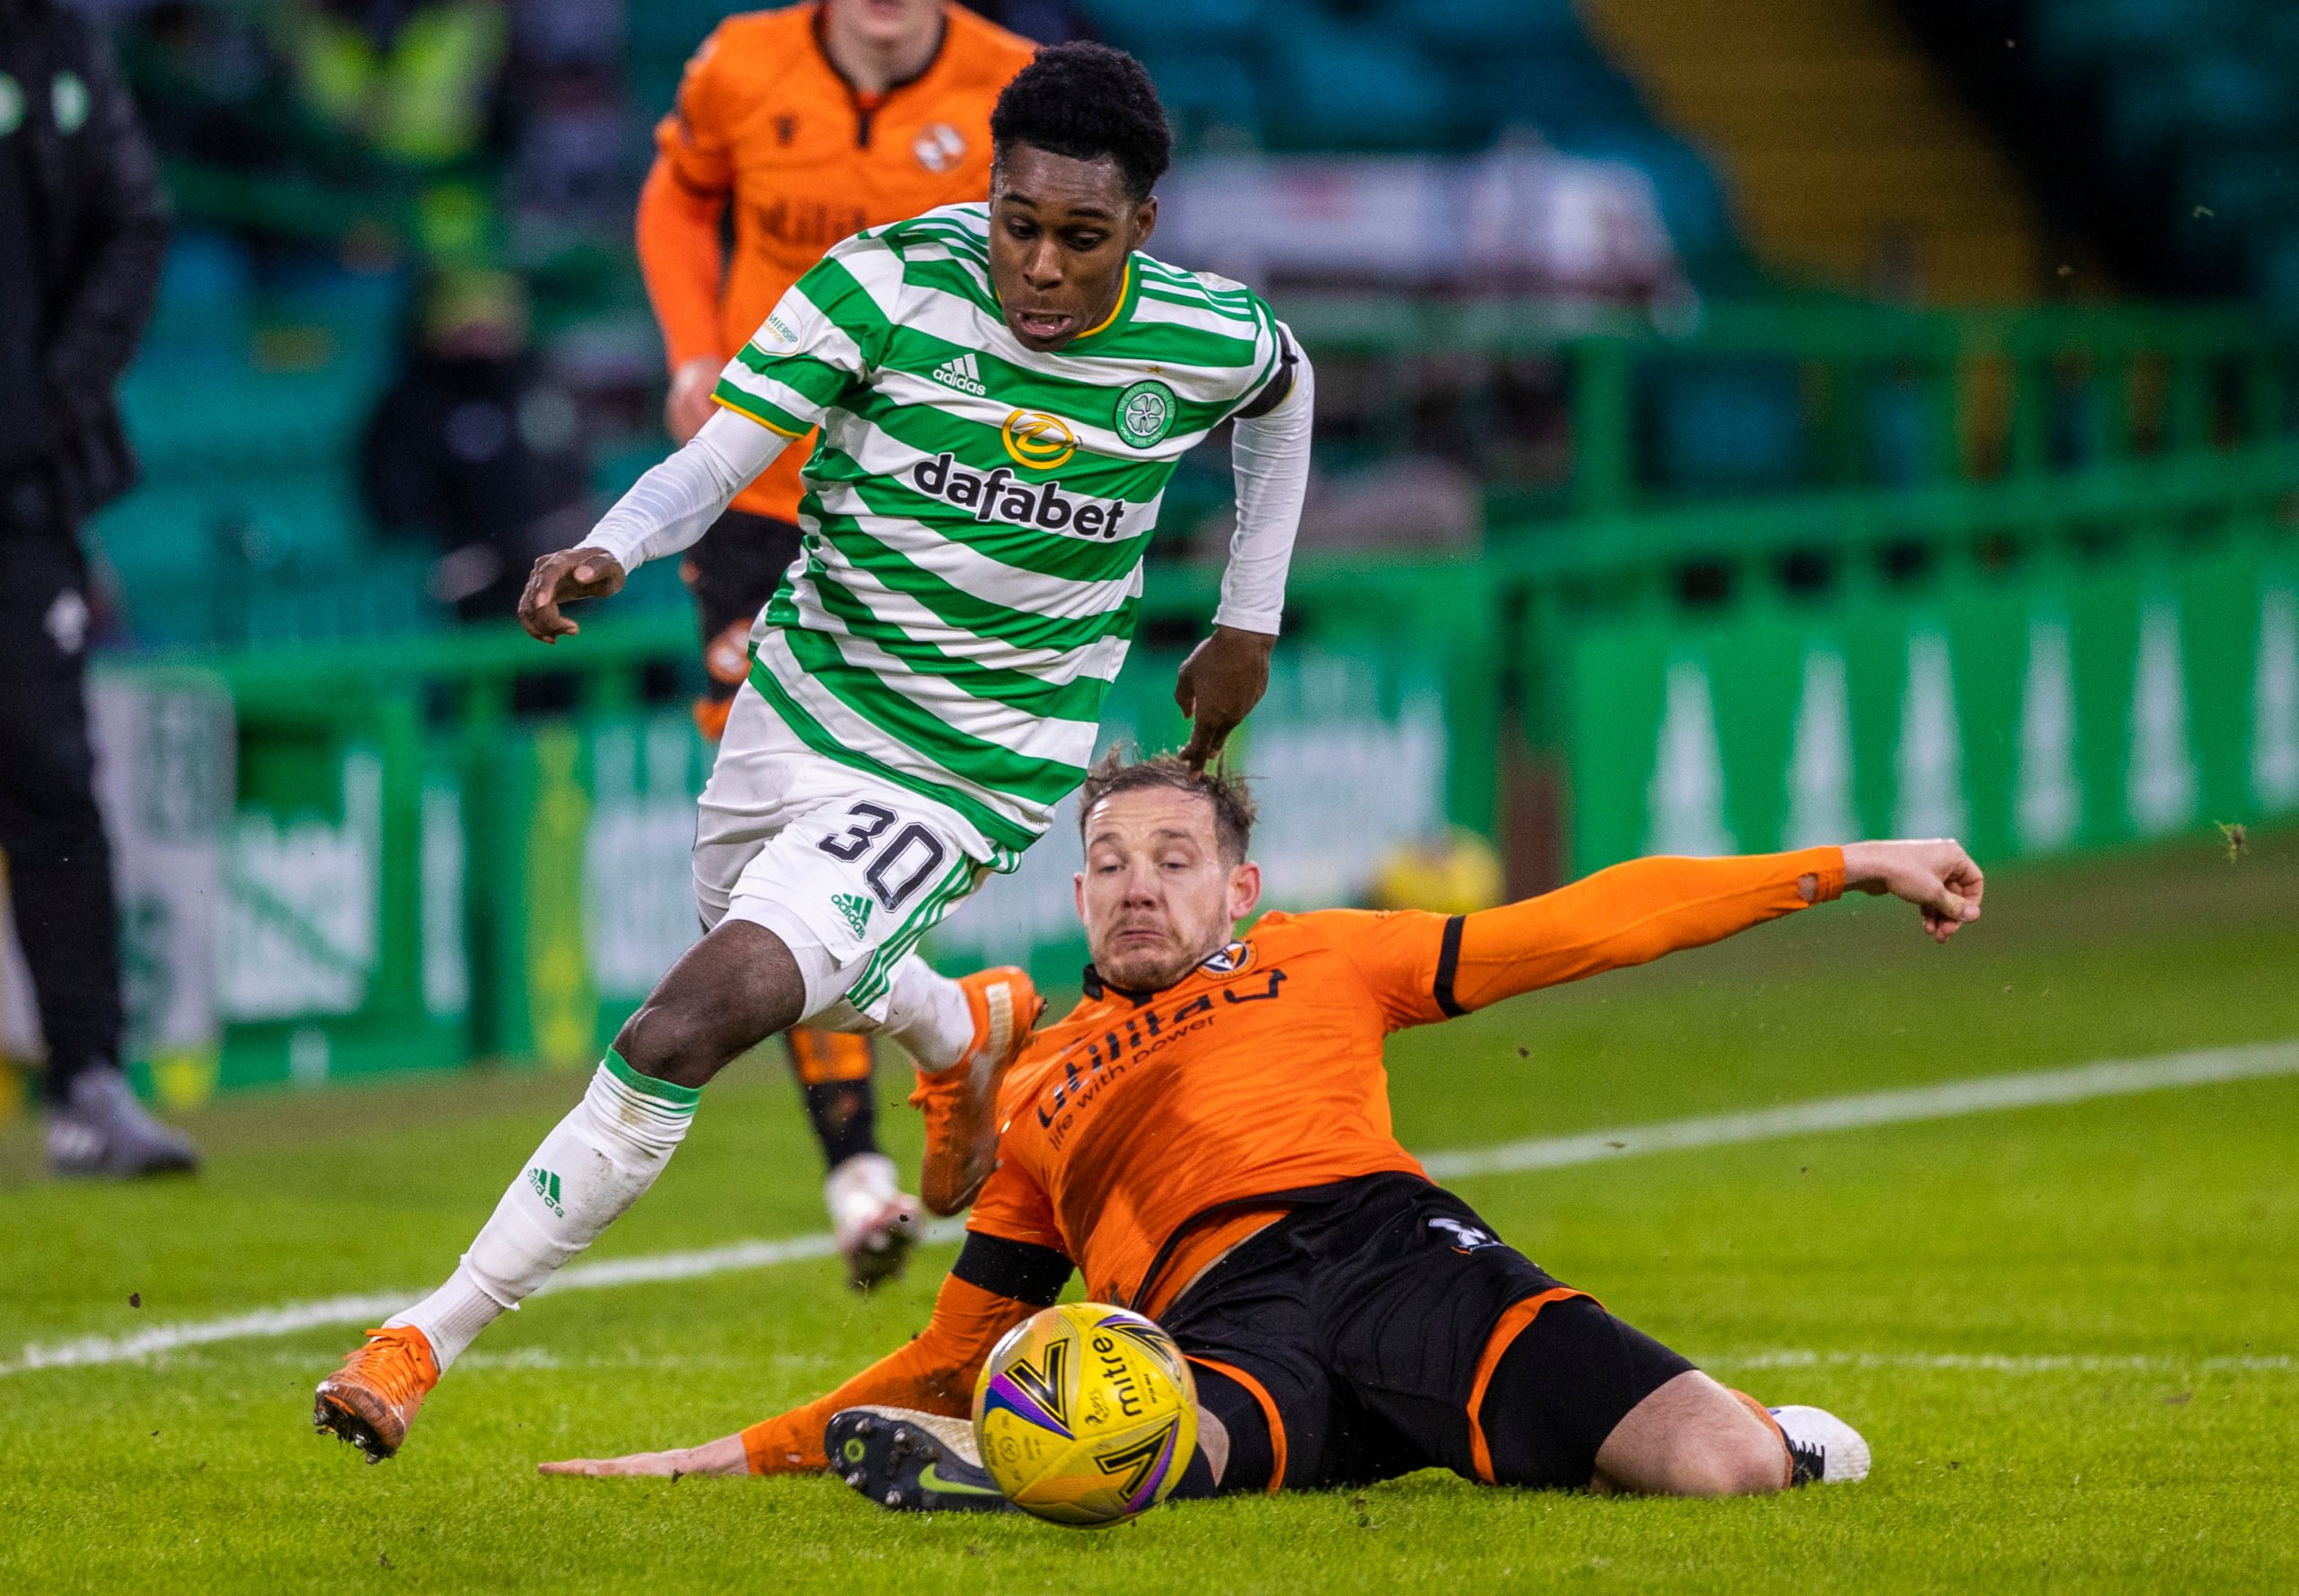 Jeremie Frimpong was purposeful for Celtic against Dundee United